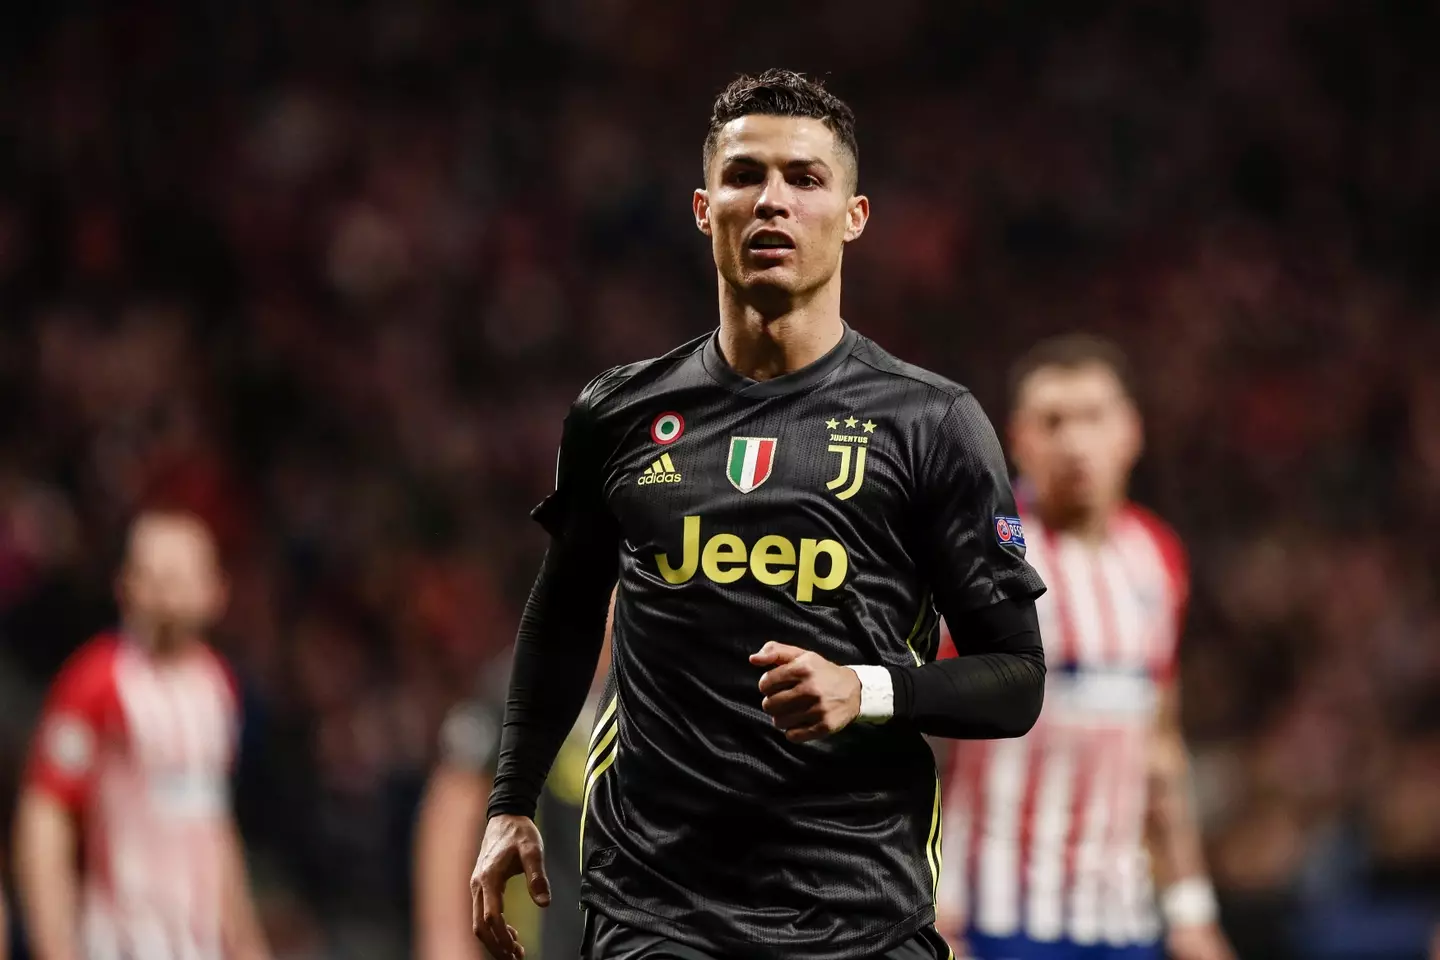 Ronaldo could be handed a suspension. Image: Alamy